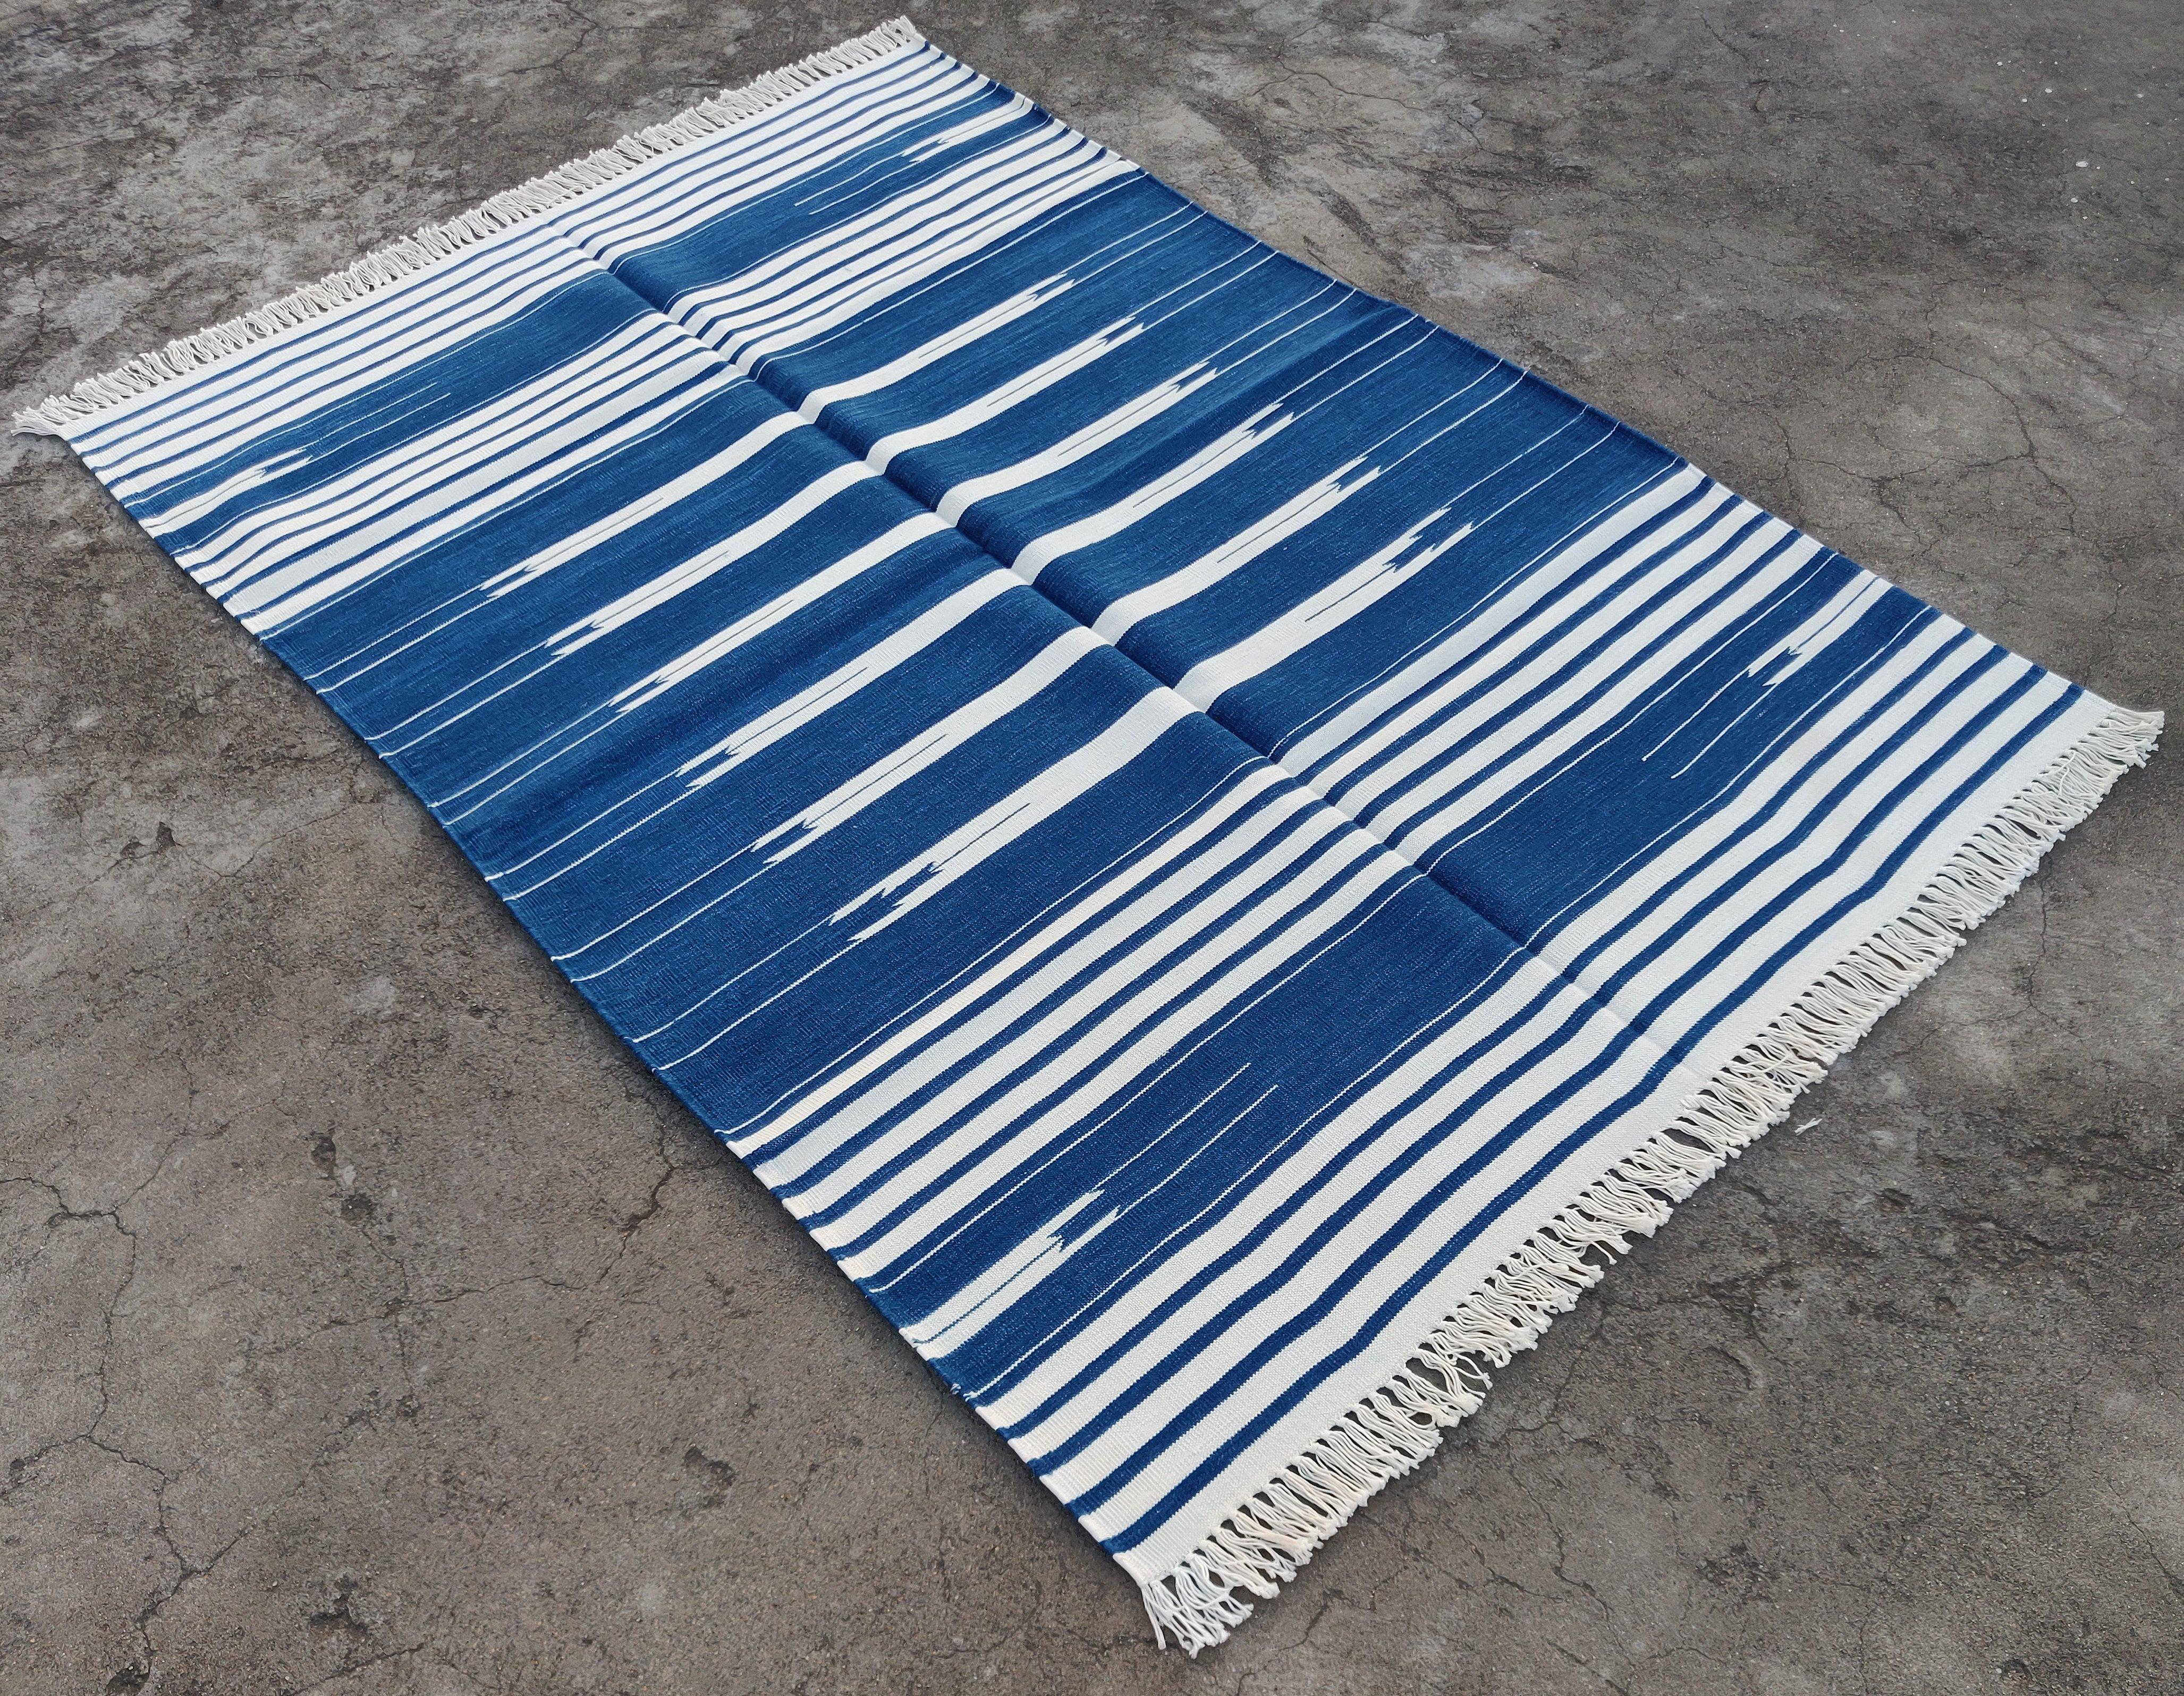 Cotton Vegetable Dyed Indigo Blue and White Striped Indian Dhurrie Rug-4'x6' 

These special flat-weave dhurries are hand-woven with 15 ply 100% cotton yarn. Due to the special manufacturing techniques used to create our rugs, the size and color of